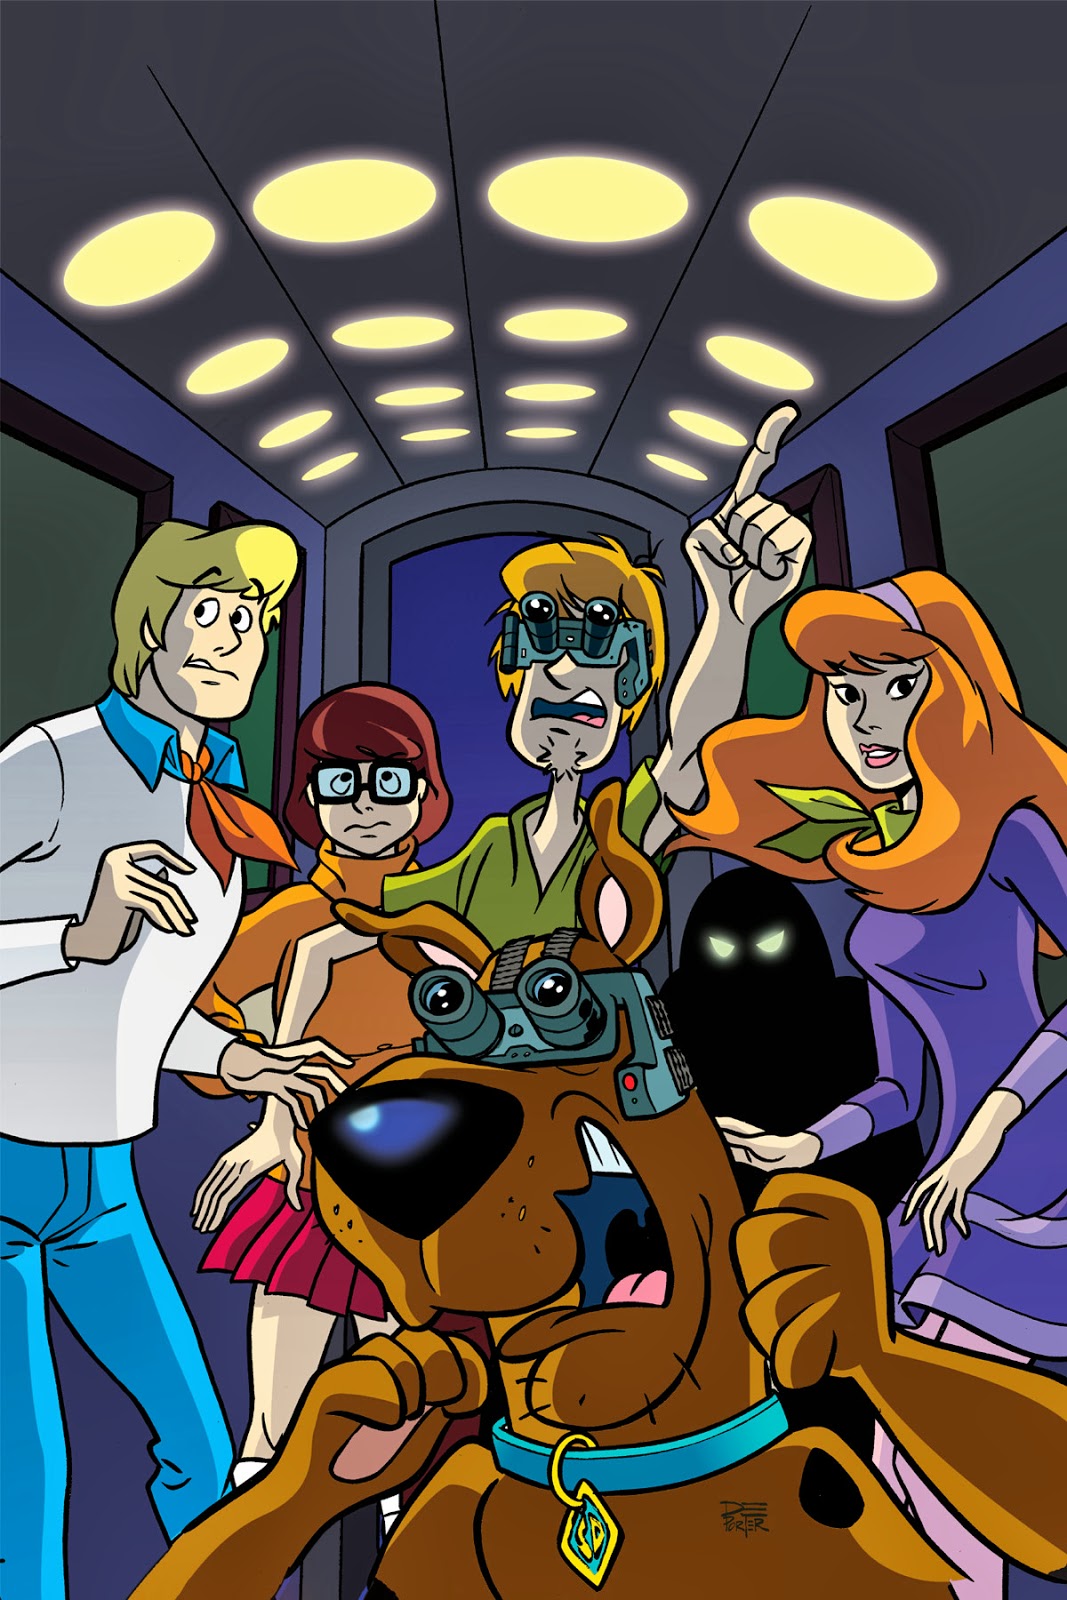 Scooby Doo HD Wallpaper 1080p High Definition